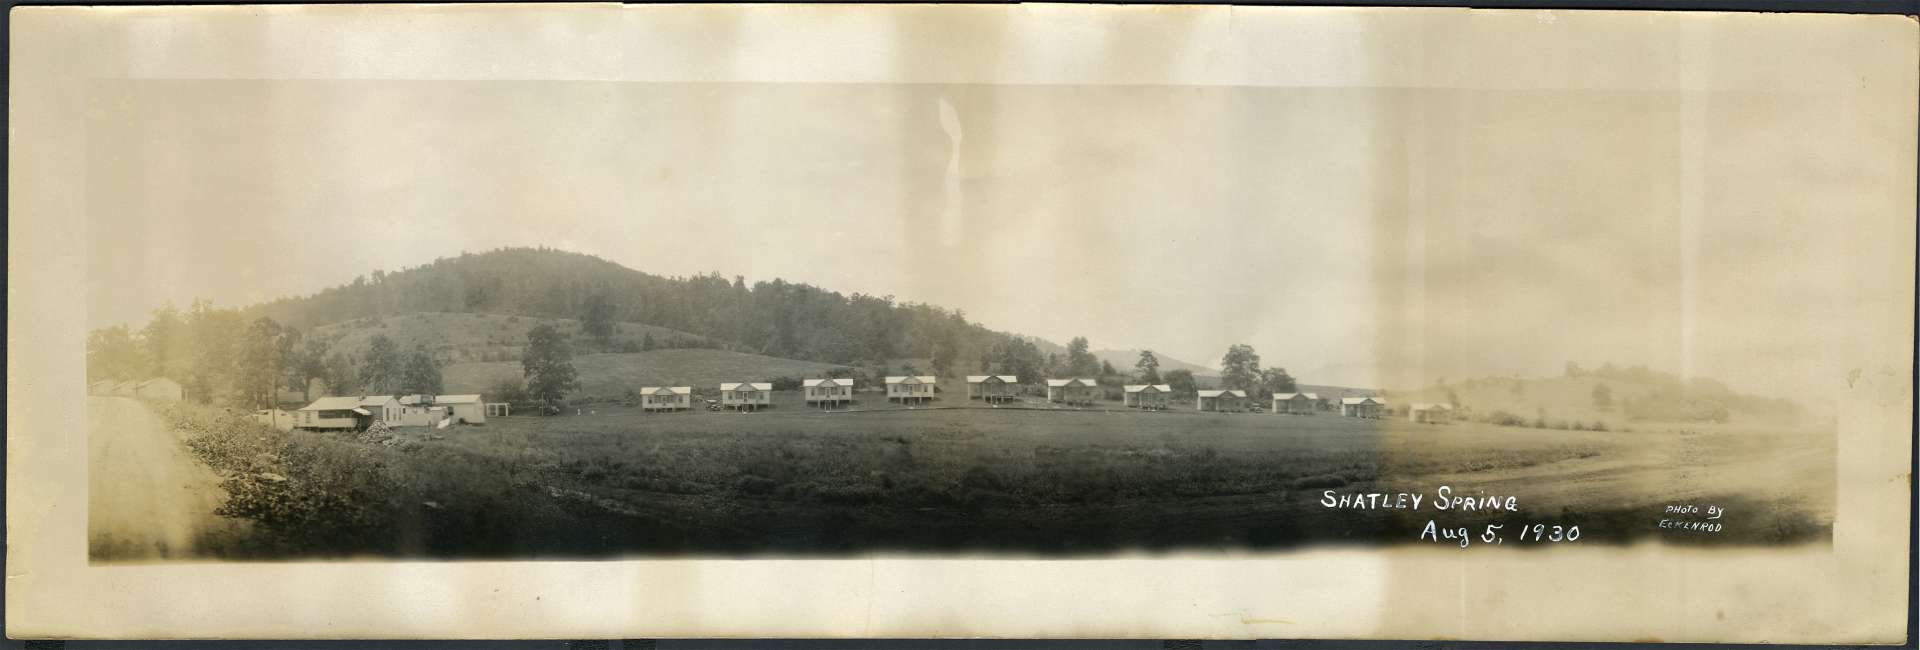 Vintage panoramic photo inscribed "Shatley Springs, Aug 5,1930. Photo By Eckenrod." Photograph was possibly made by Walter B. Eckenrod.